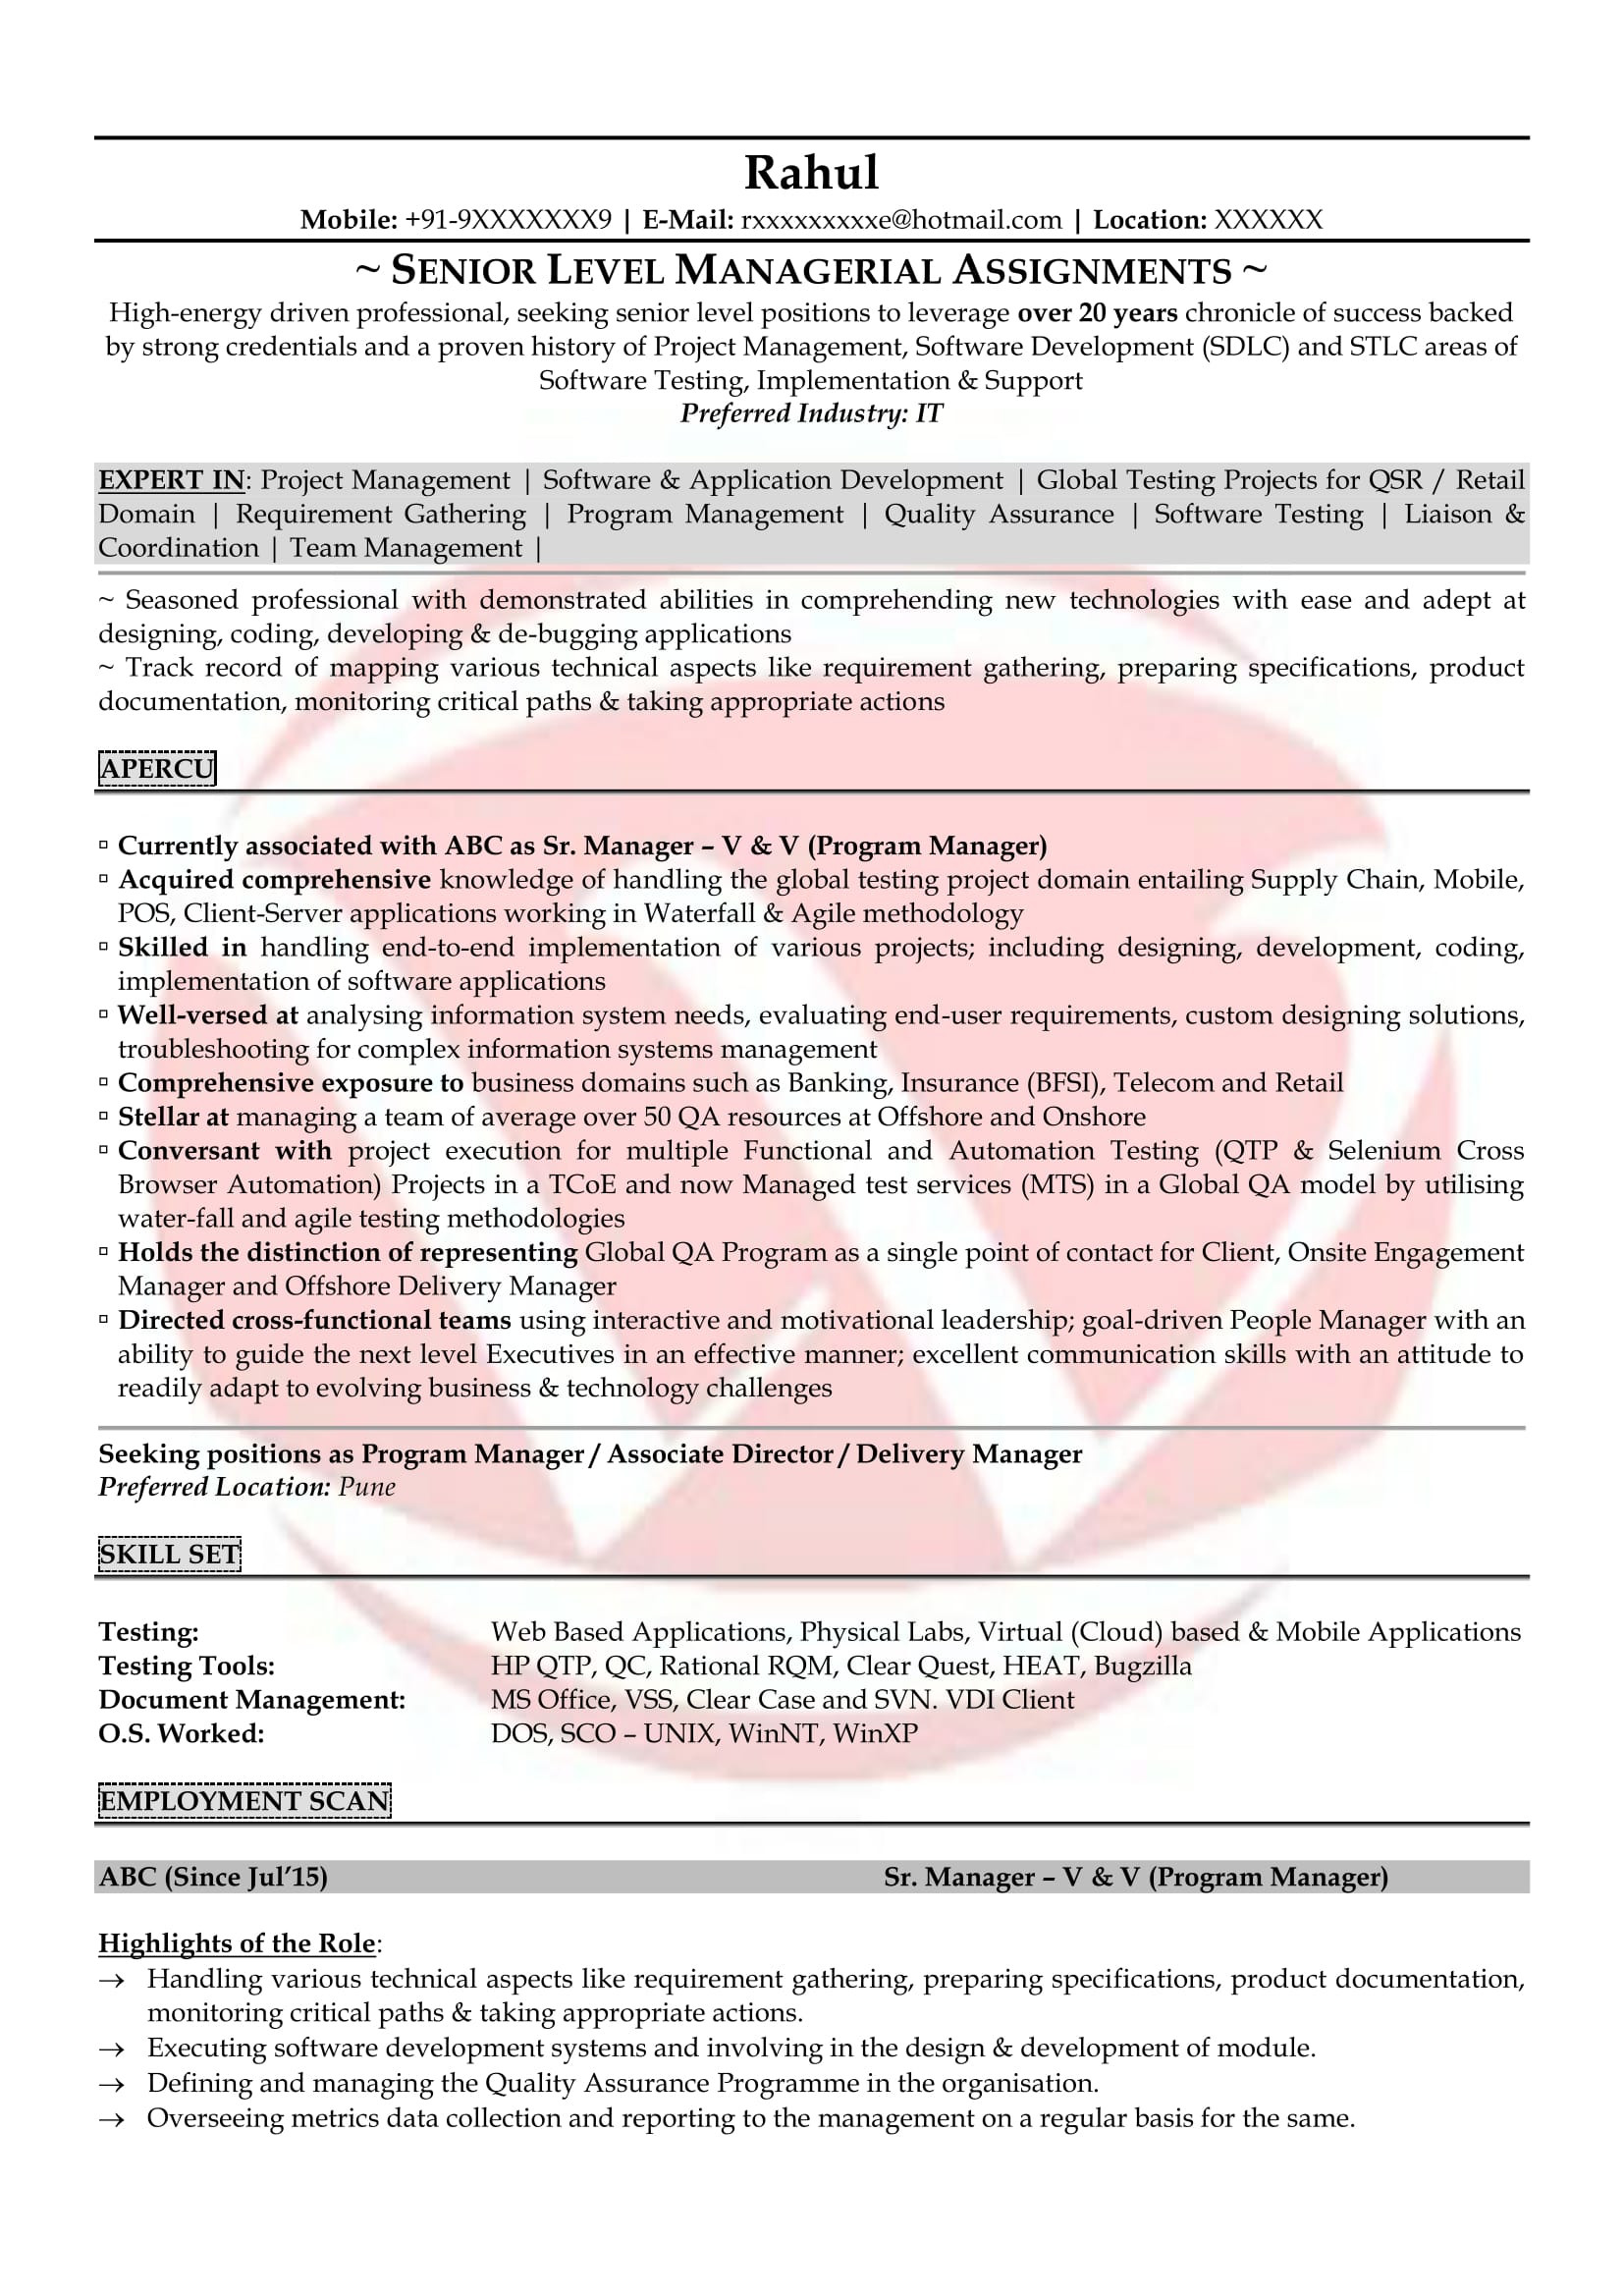 Resume Templates for Experienced software Testing Professionals software Testing Sample Resumes, Download Resume format Templates!